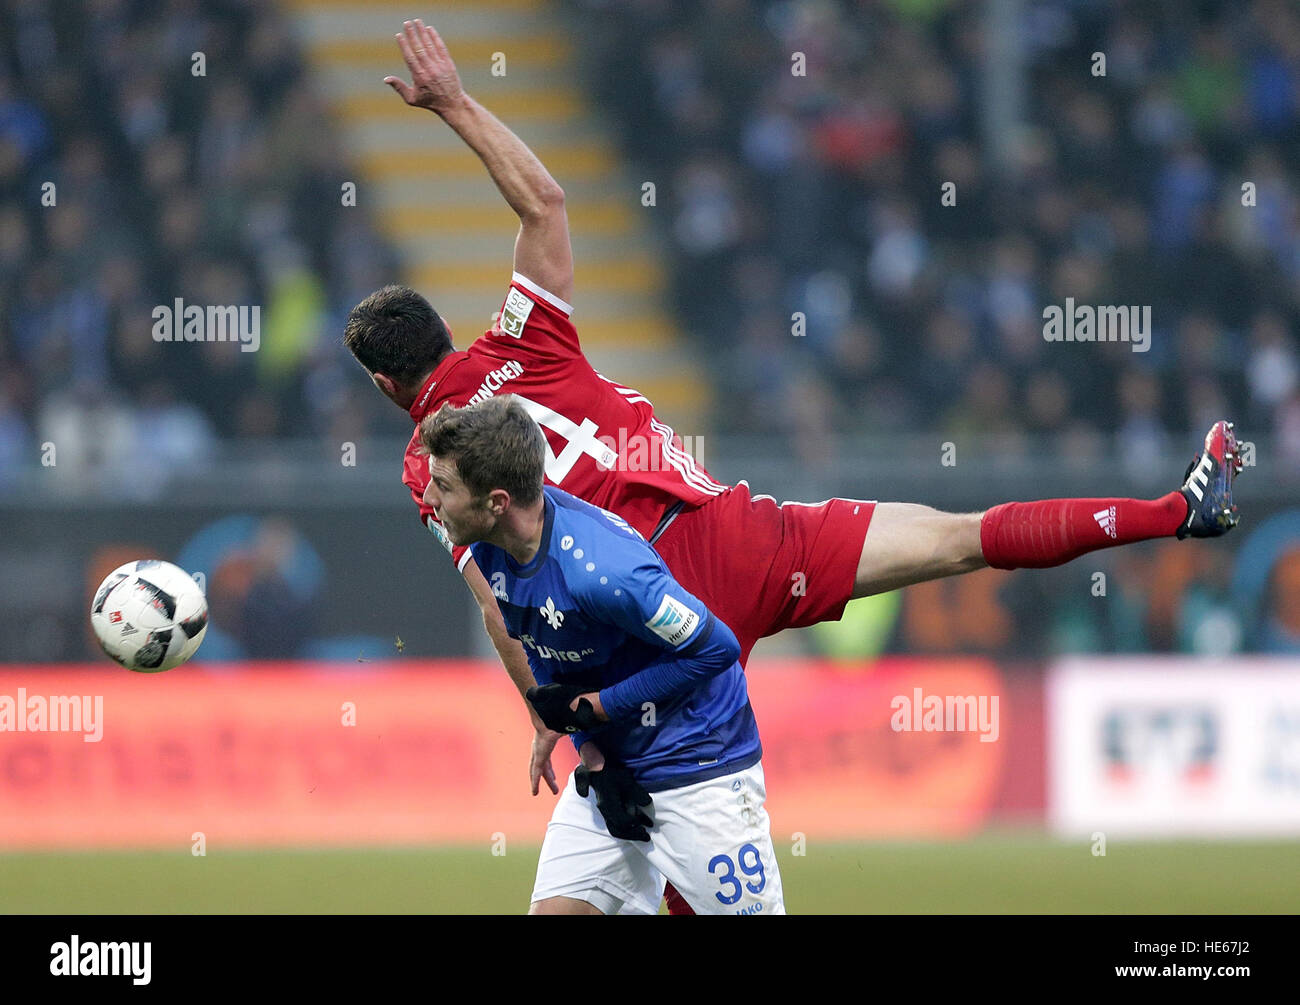 Darmstadst, Germany. 18th Dec, 2016. Darmstadt's Sven Schipplock and Munich's xabi Alonso compete for the ball during the Bundesliga soccer match between Darmstadt 98 and Bayern Munich at Jonathan Heimes stadium in Darmstadst, Germany, 18 December 2016. Photo: Hasan Bratic/dpa/Alamy Live News Stock Photo